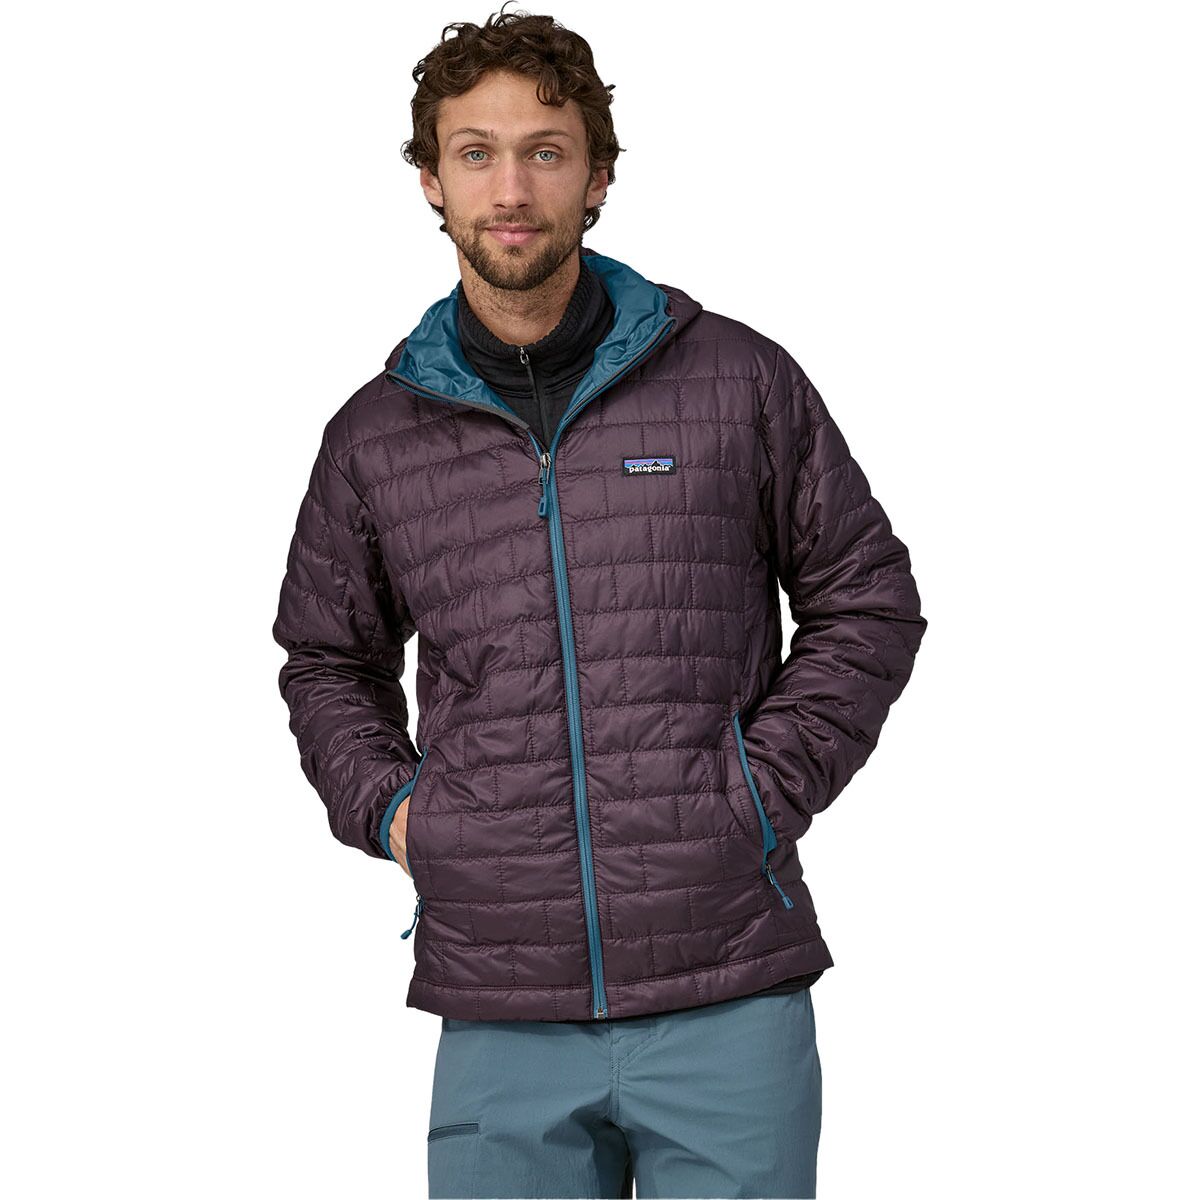 Patagonia Nano Puff Hooded Insulated Jacket - Men's